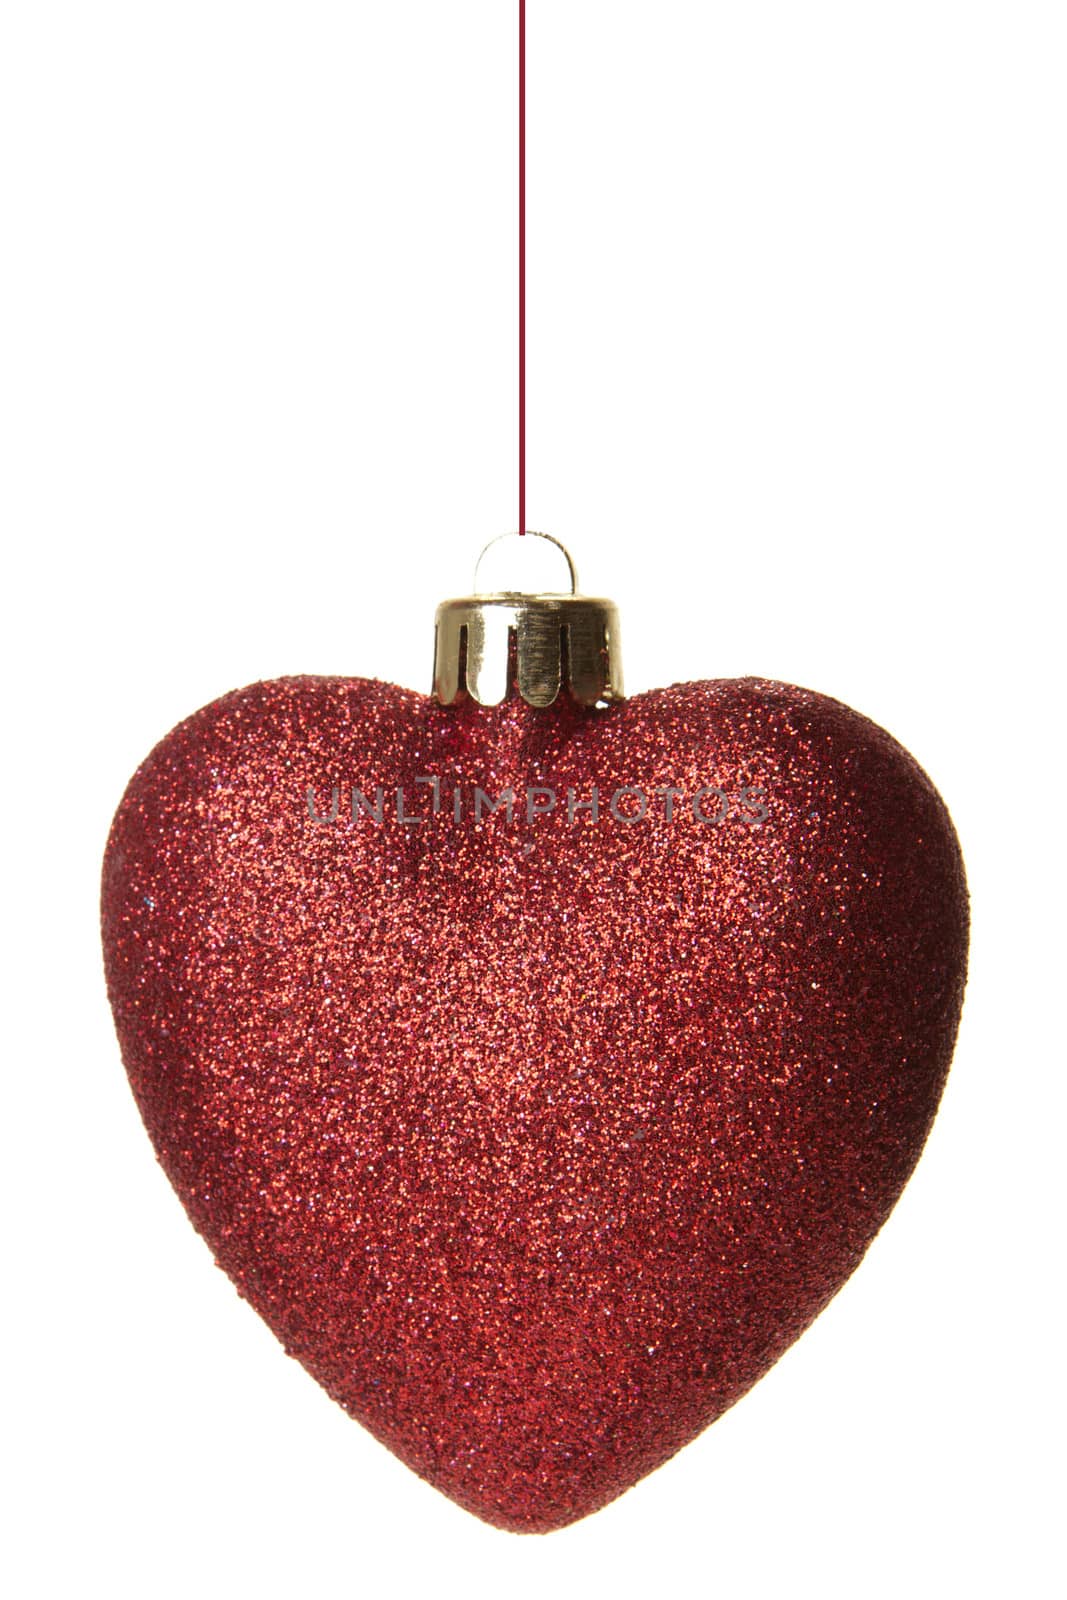 christmas ornament red by Tomjac1980